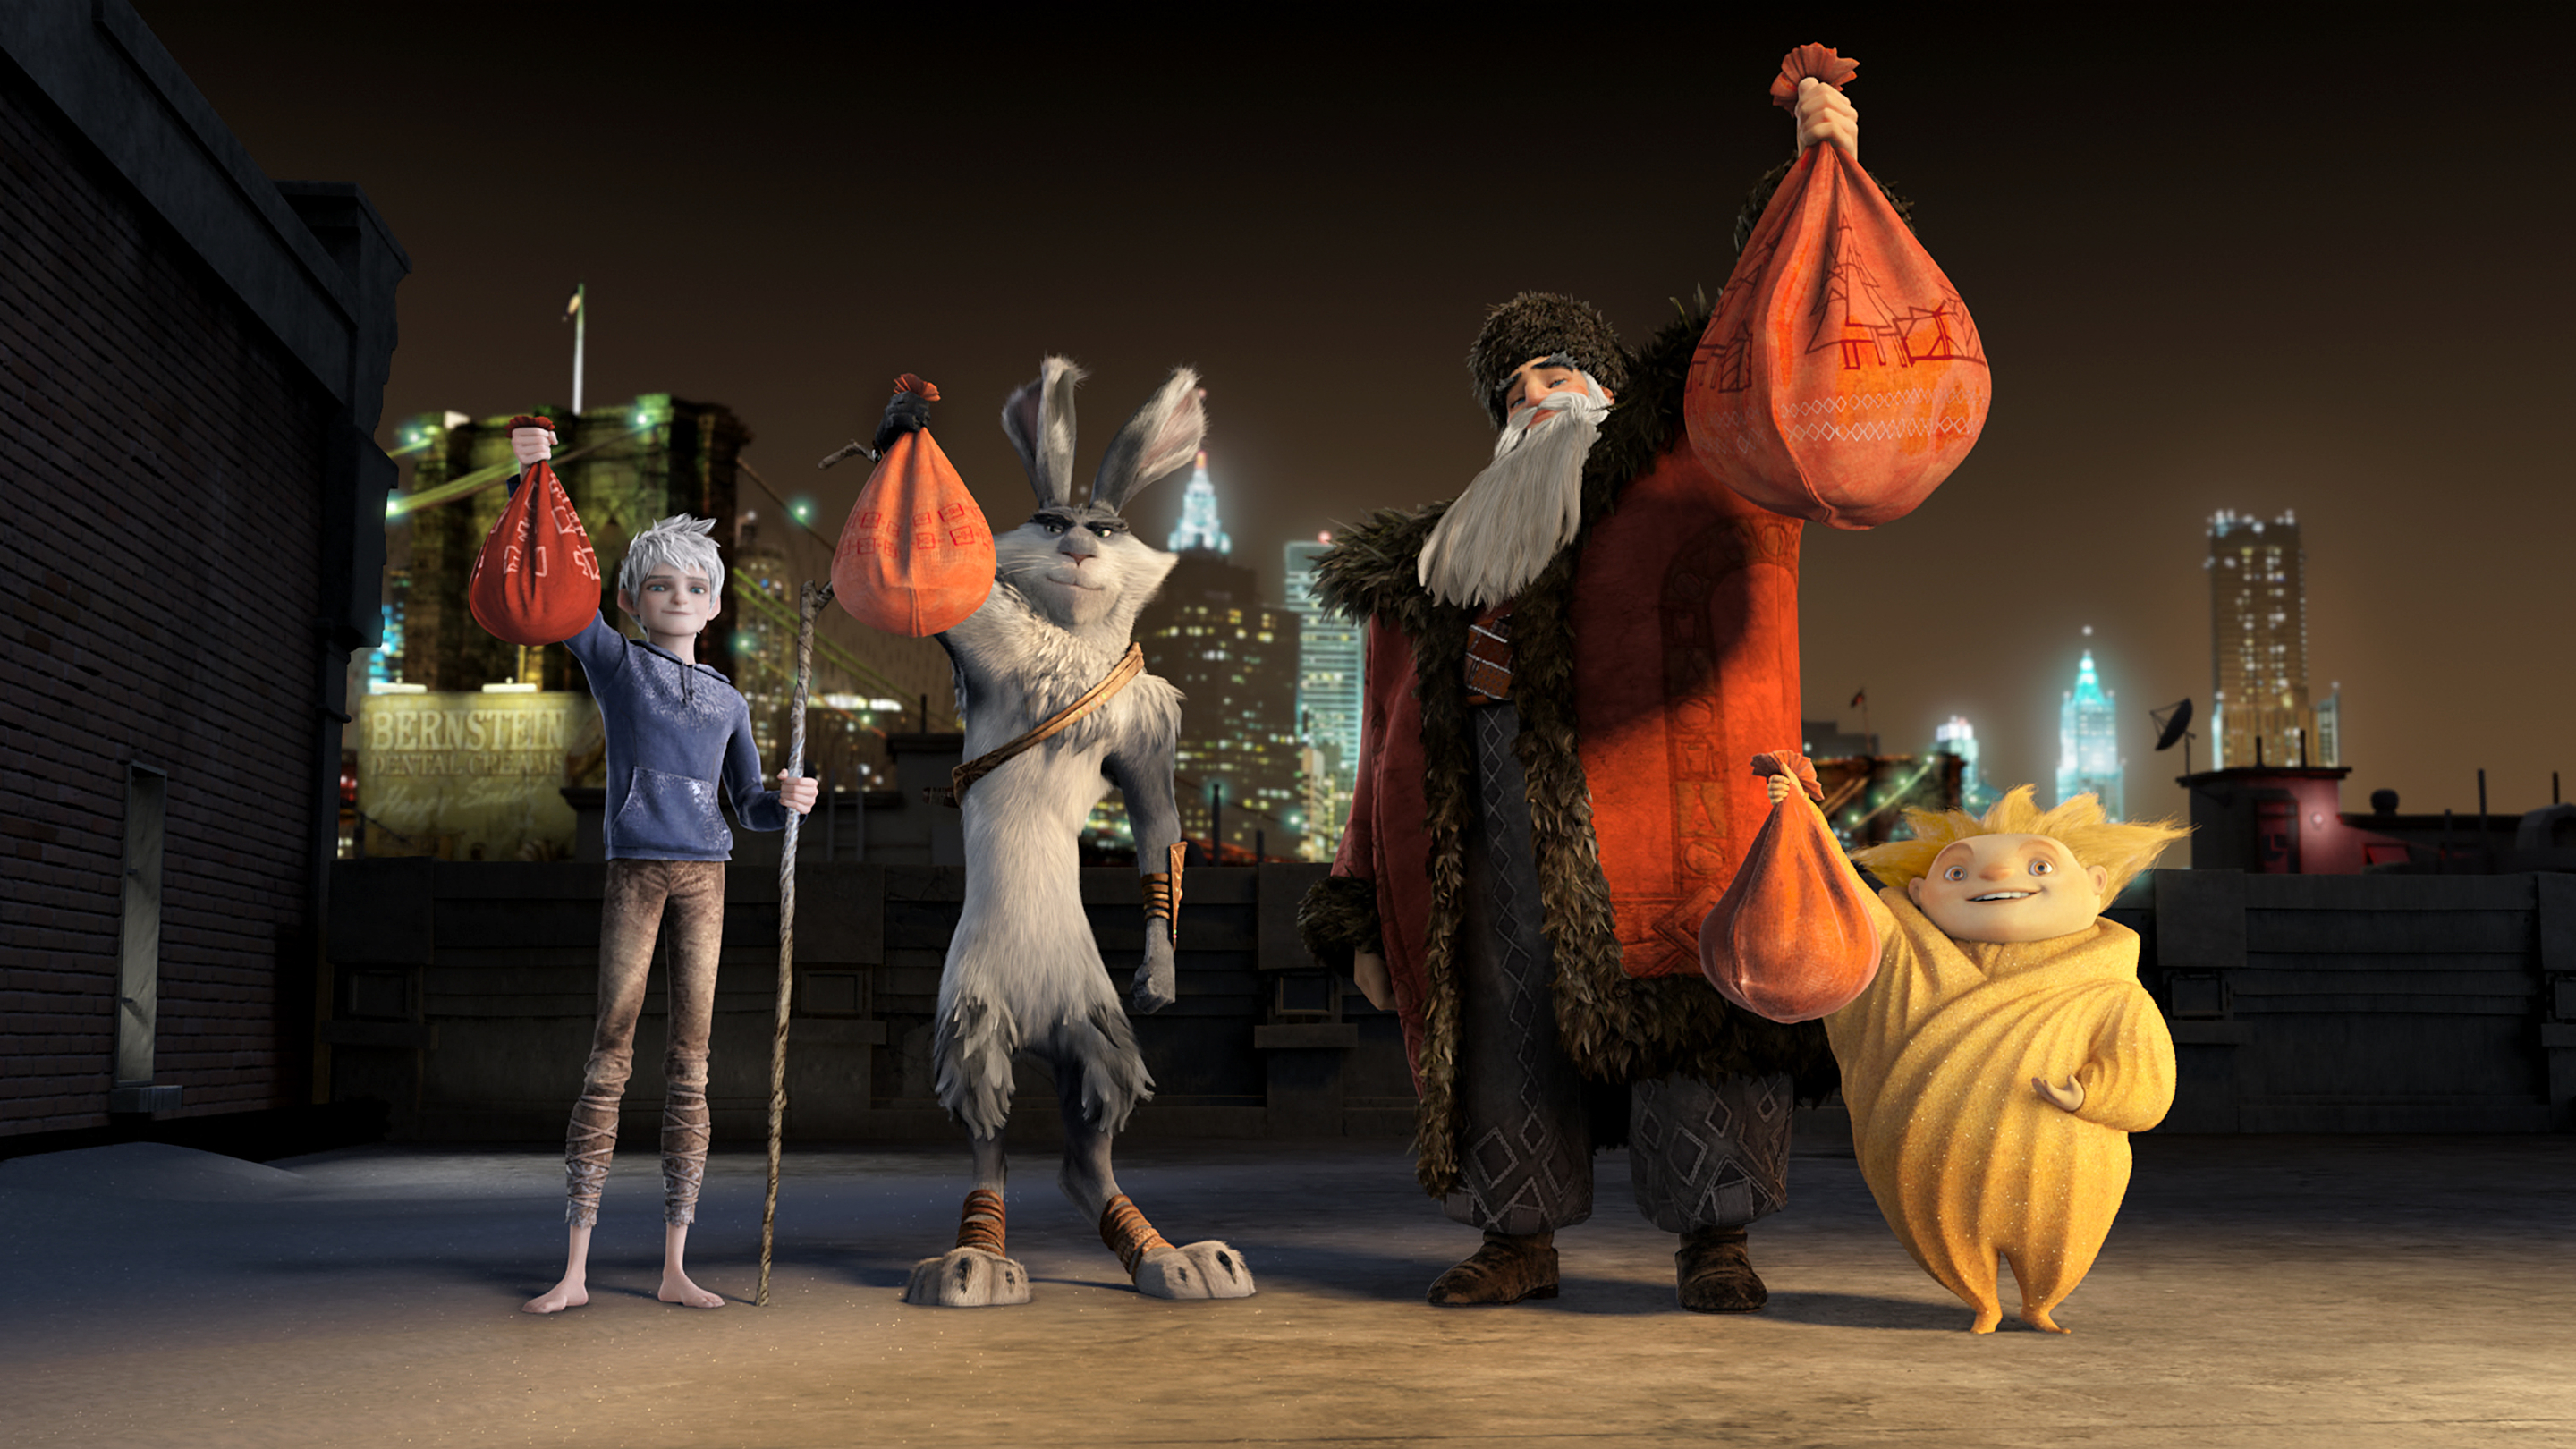 Jack Frost North Rise Of The Guardians E Aster Bunnymund Sandman Rise Of The Guardians 2880x1620